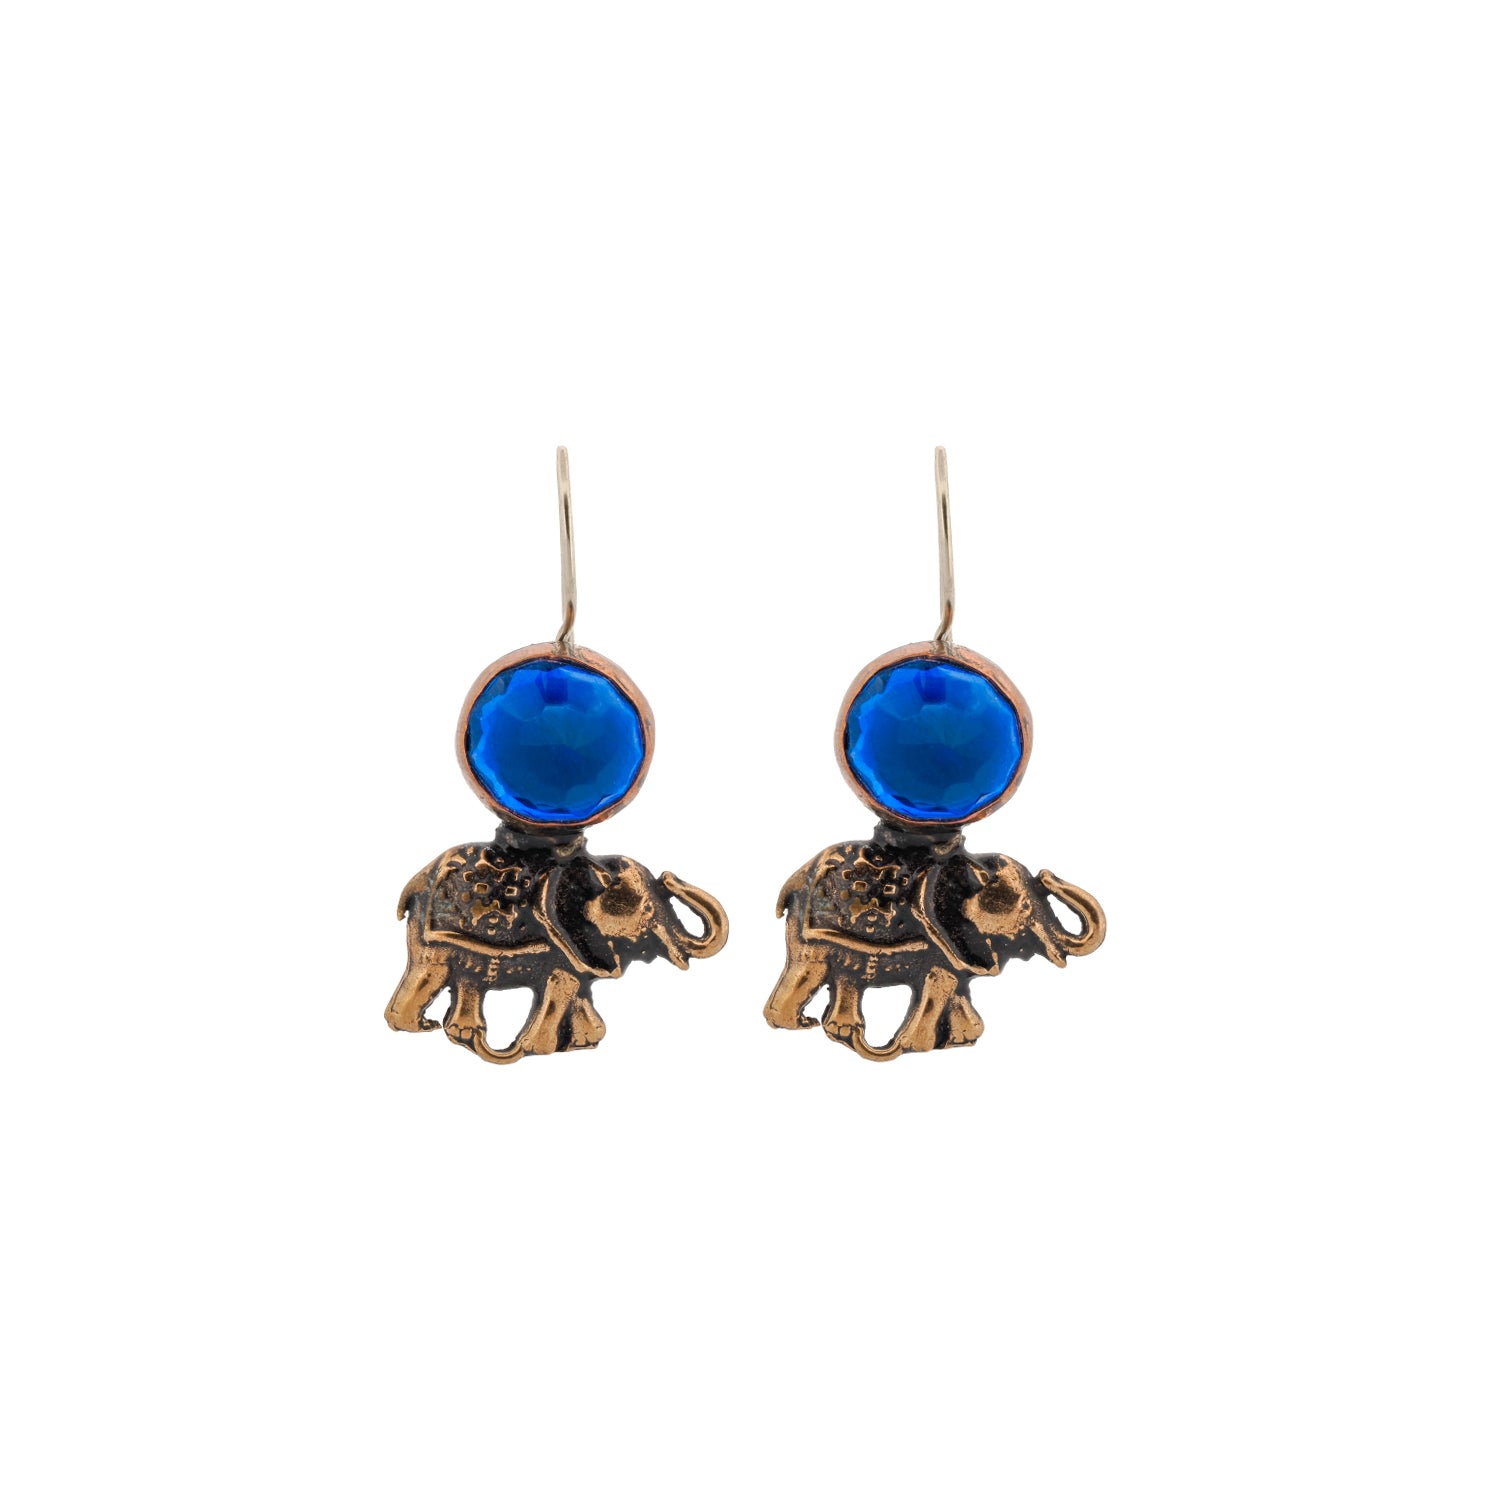 Handmade Unique Elephant Earrings with sapphire gemstones and bronze charms, symbolizing wisdom and good fortune.